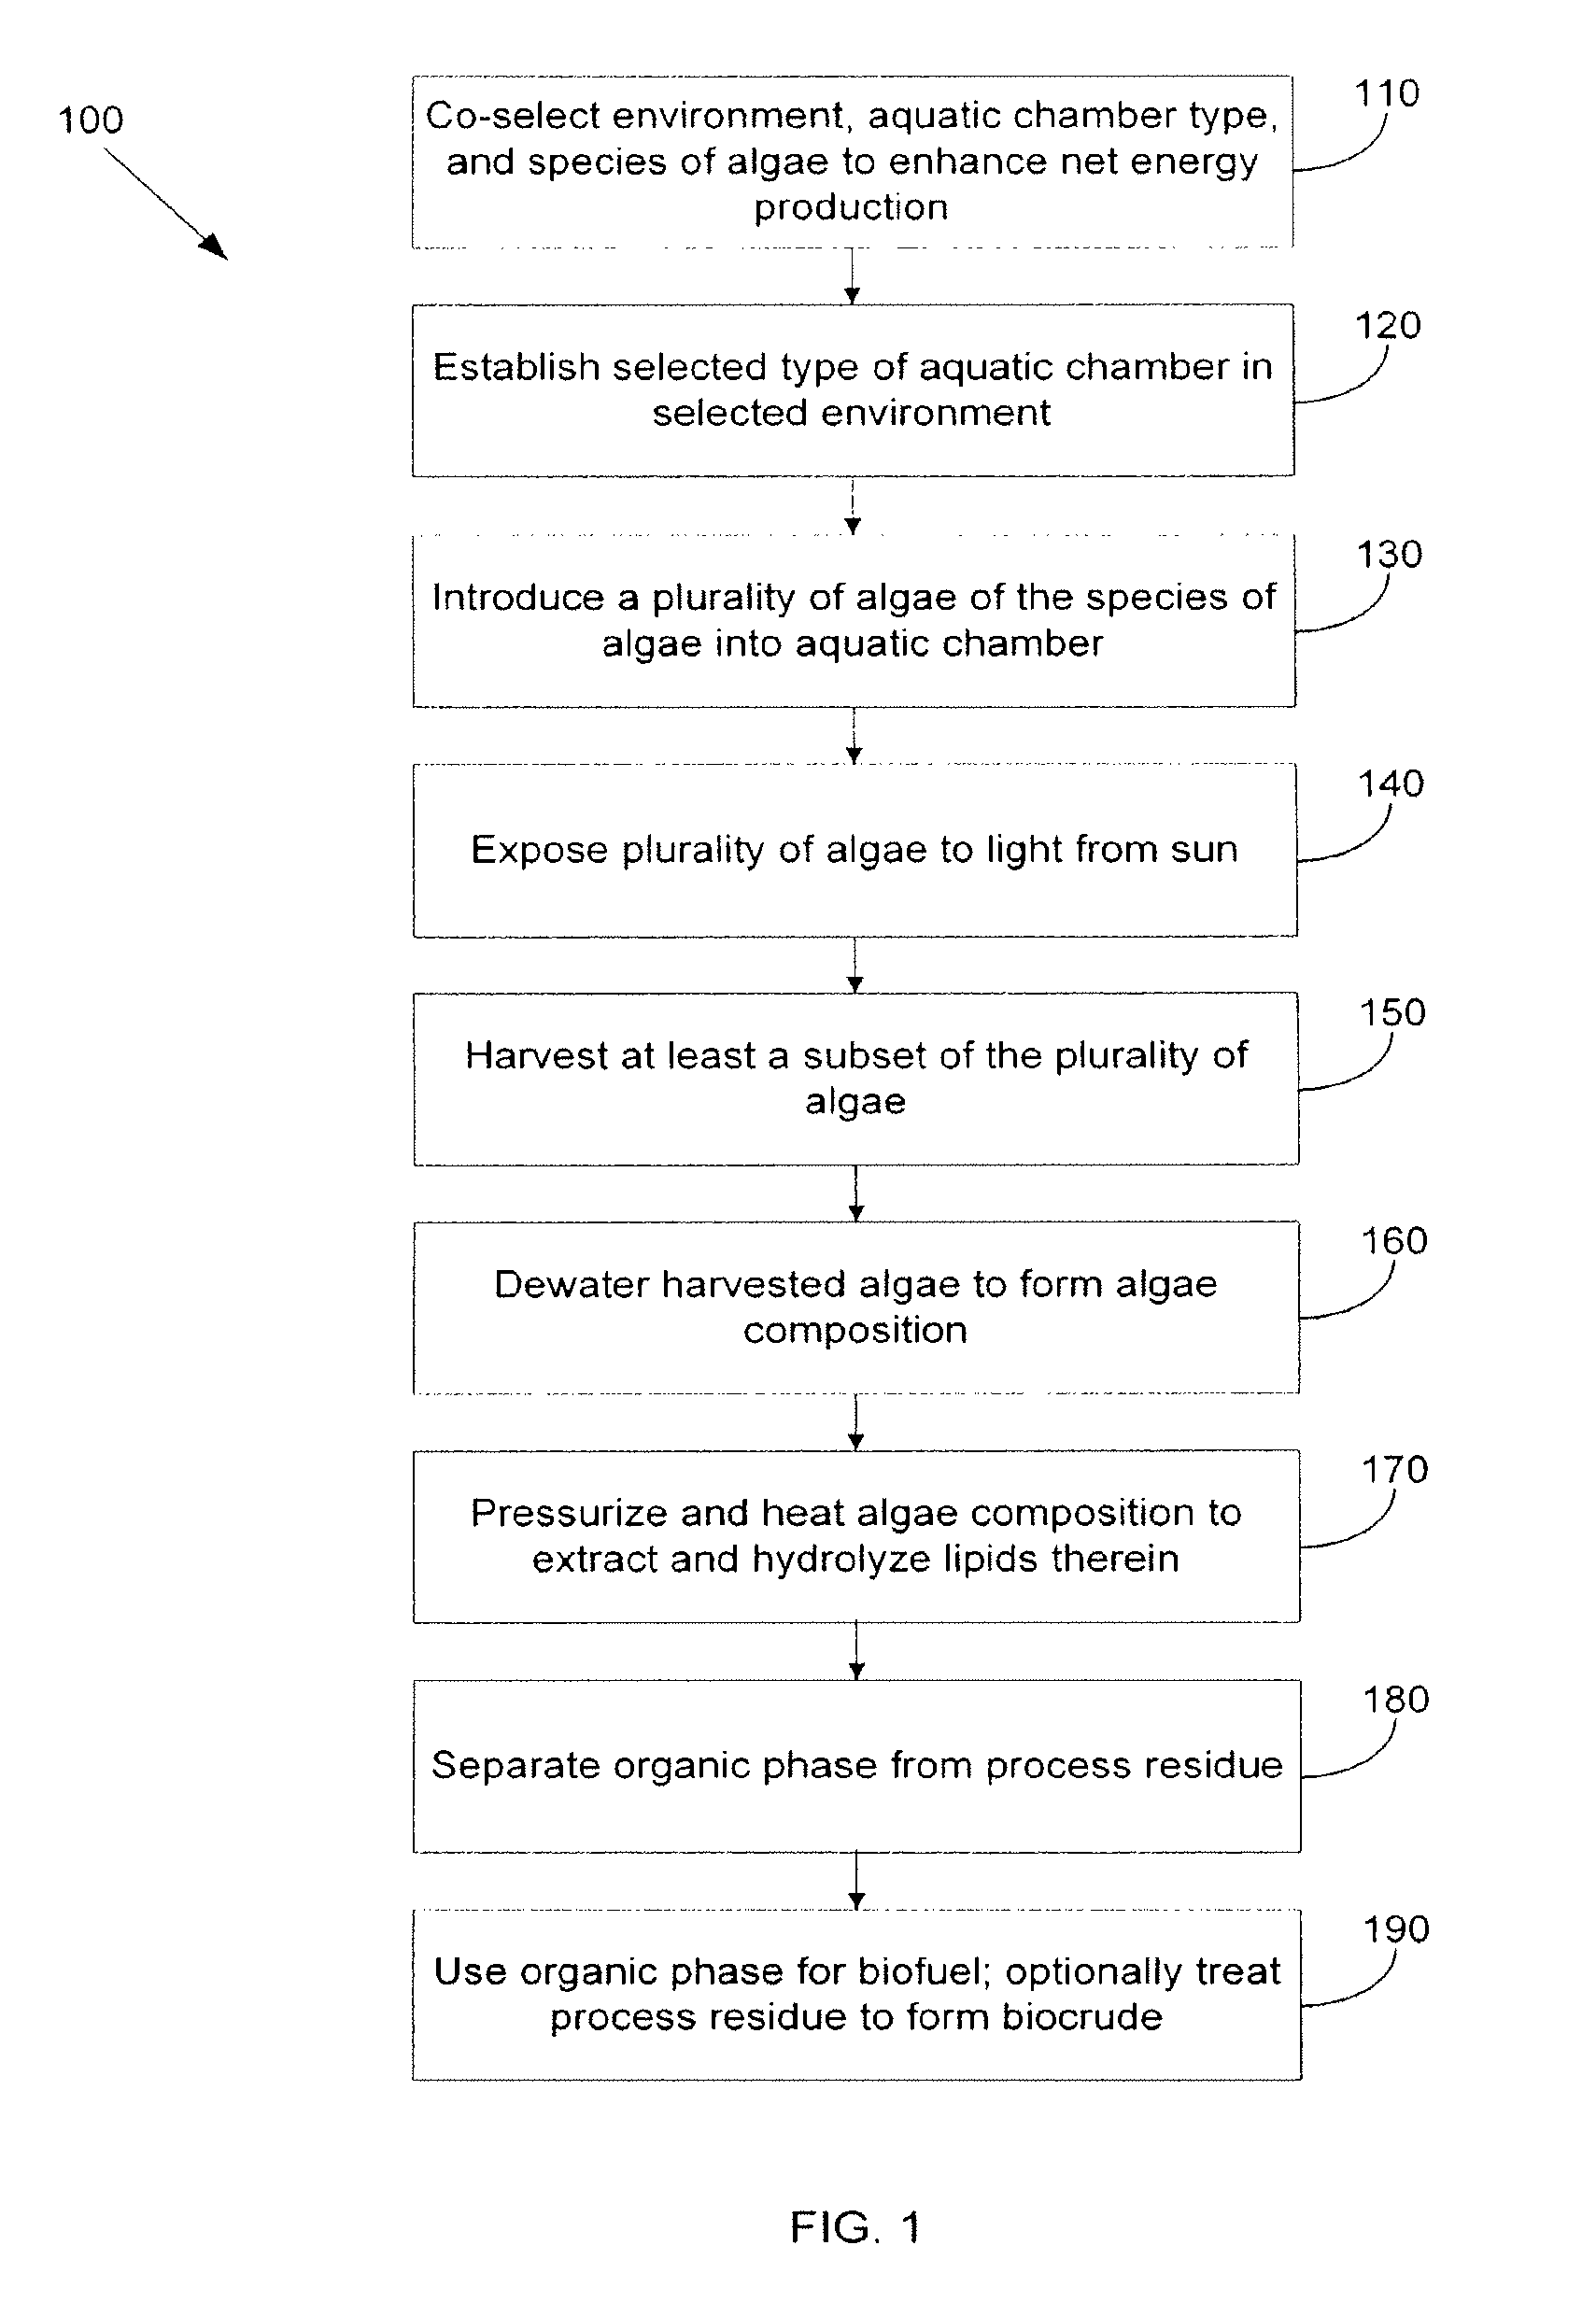 Systems and methods for hydrothermal conversion of algae into biofuel